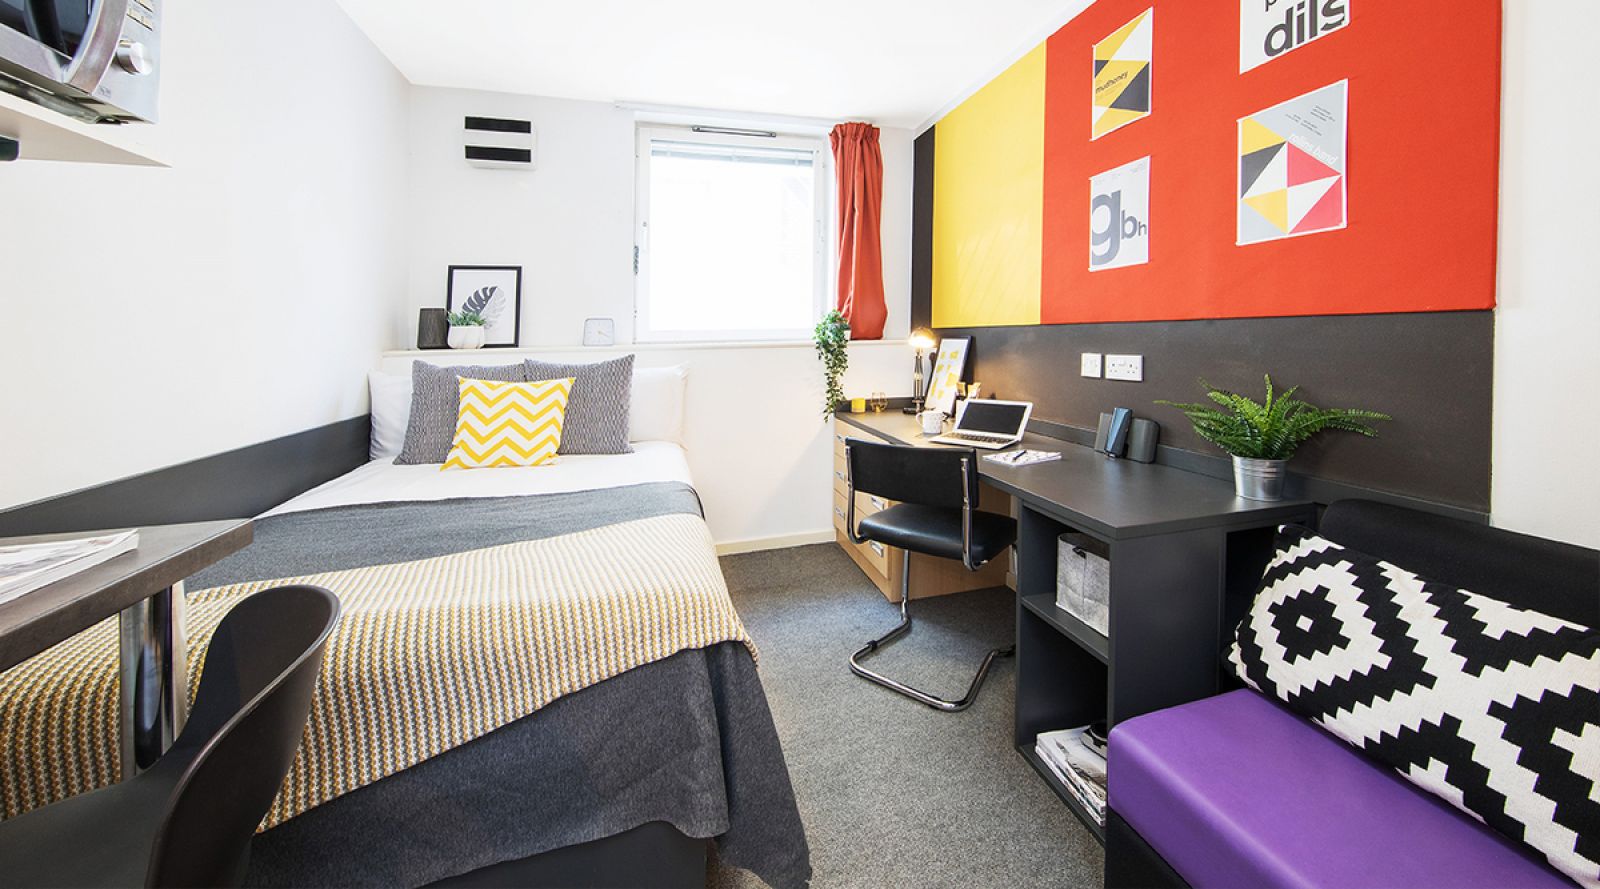 Student residential halls bedroom interior, with a neatly made bed and a desk.